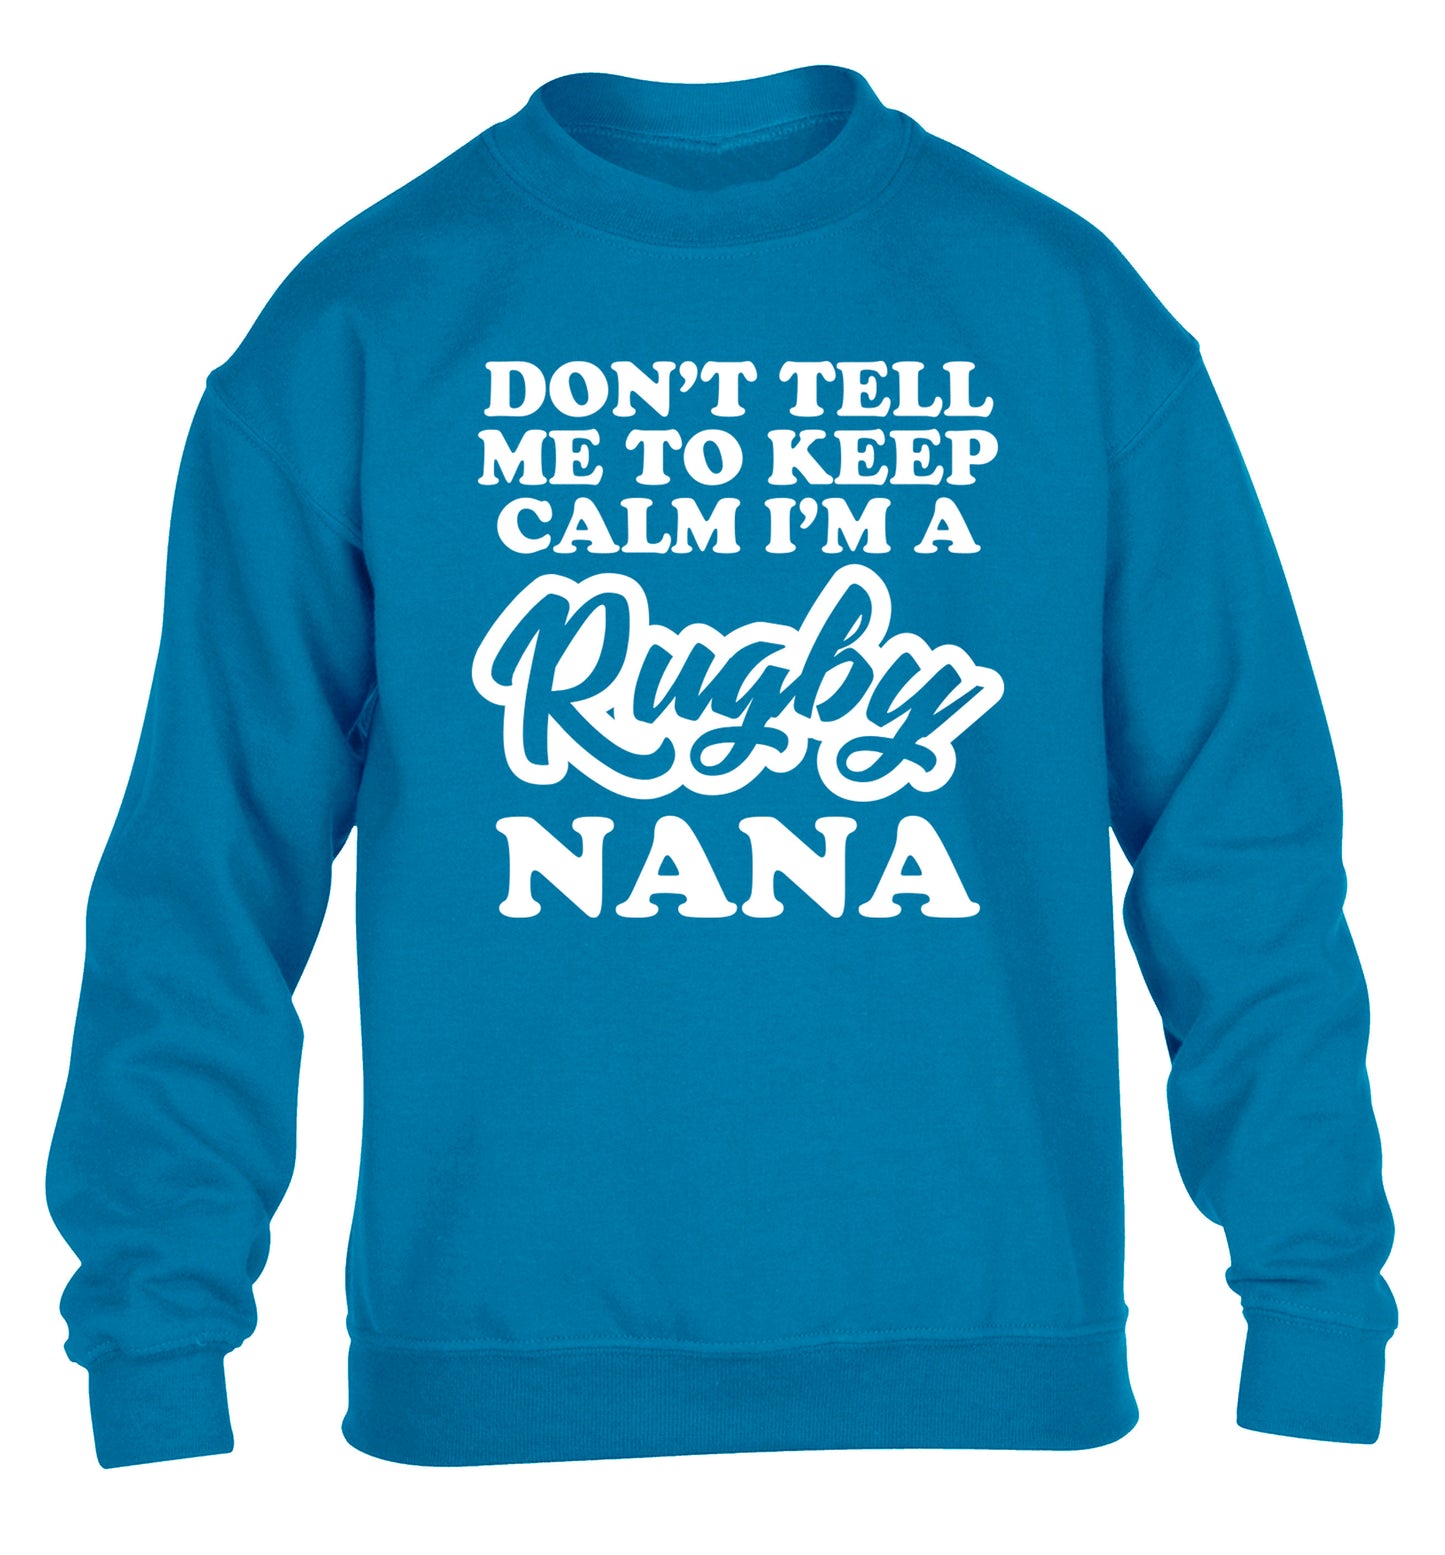 Don't tell me to keep calm I'm a rugby nana children's blue sweater 12-13 Years